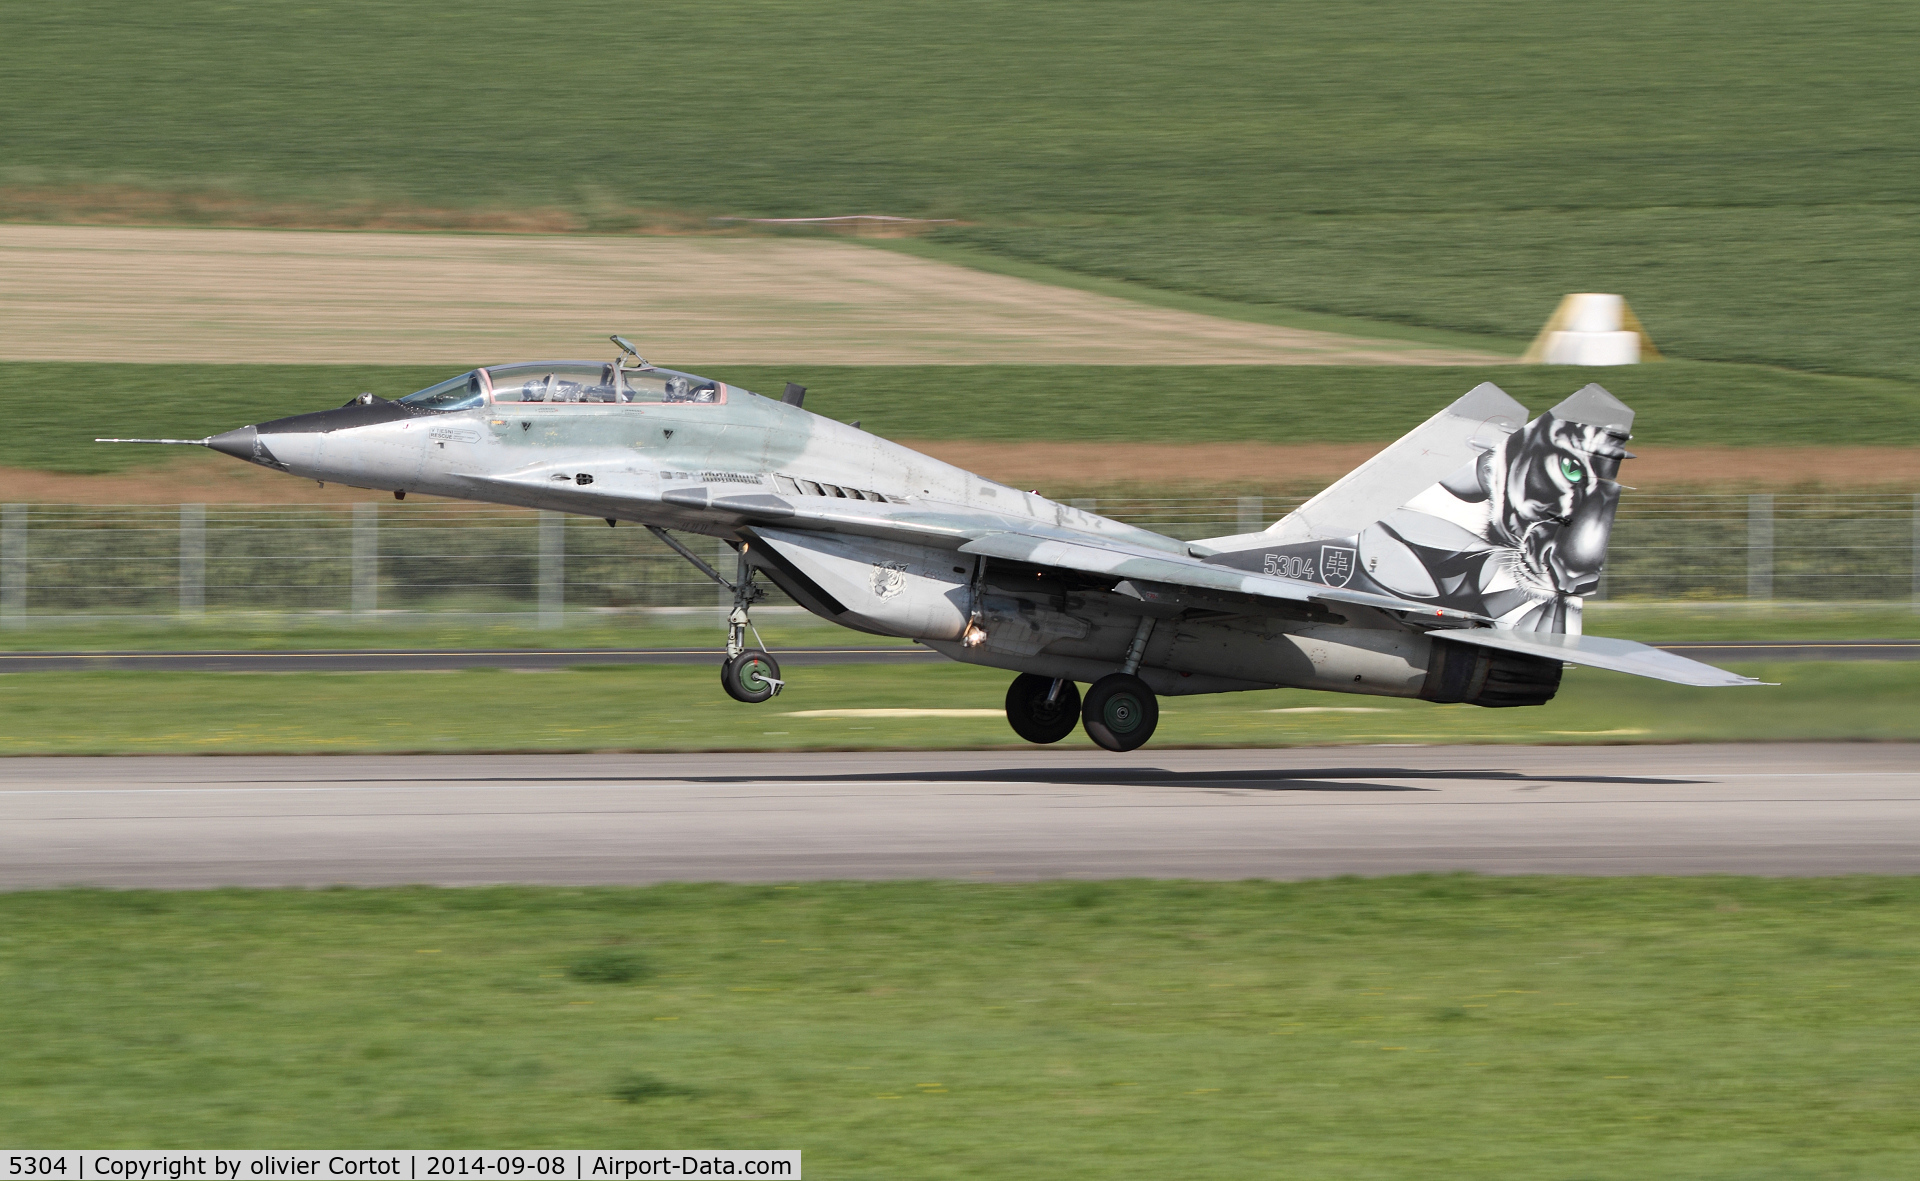 5304, Mikoyan-Gurevich MiG-29UB C/N N50903028253, taking off from Payerne